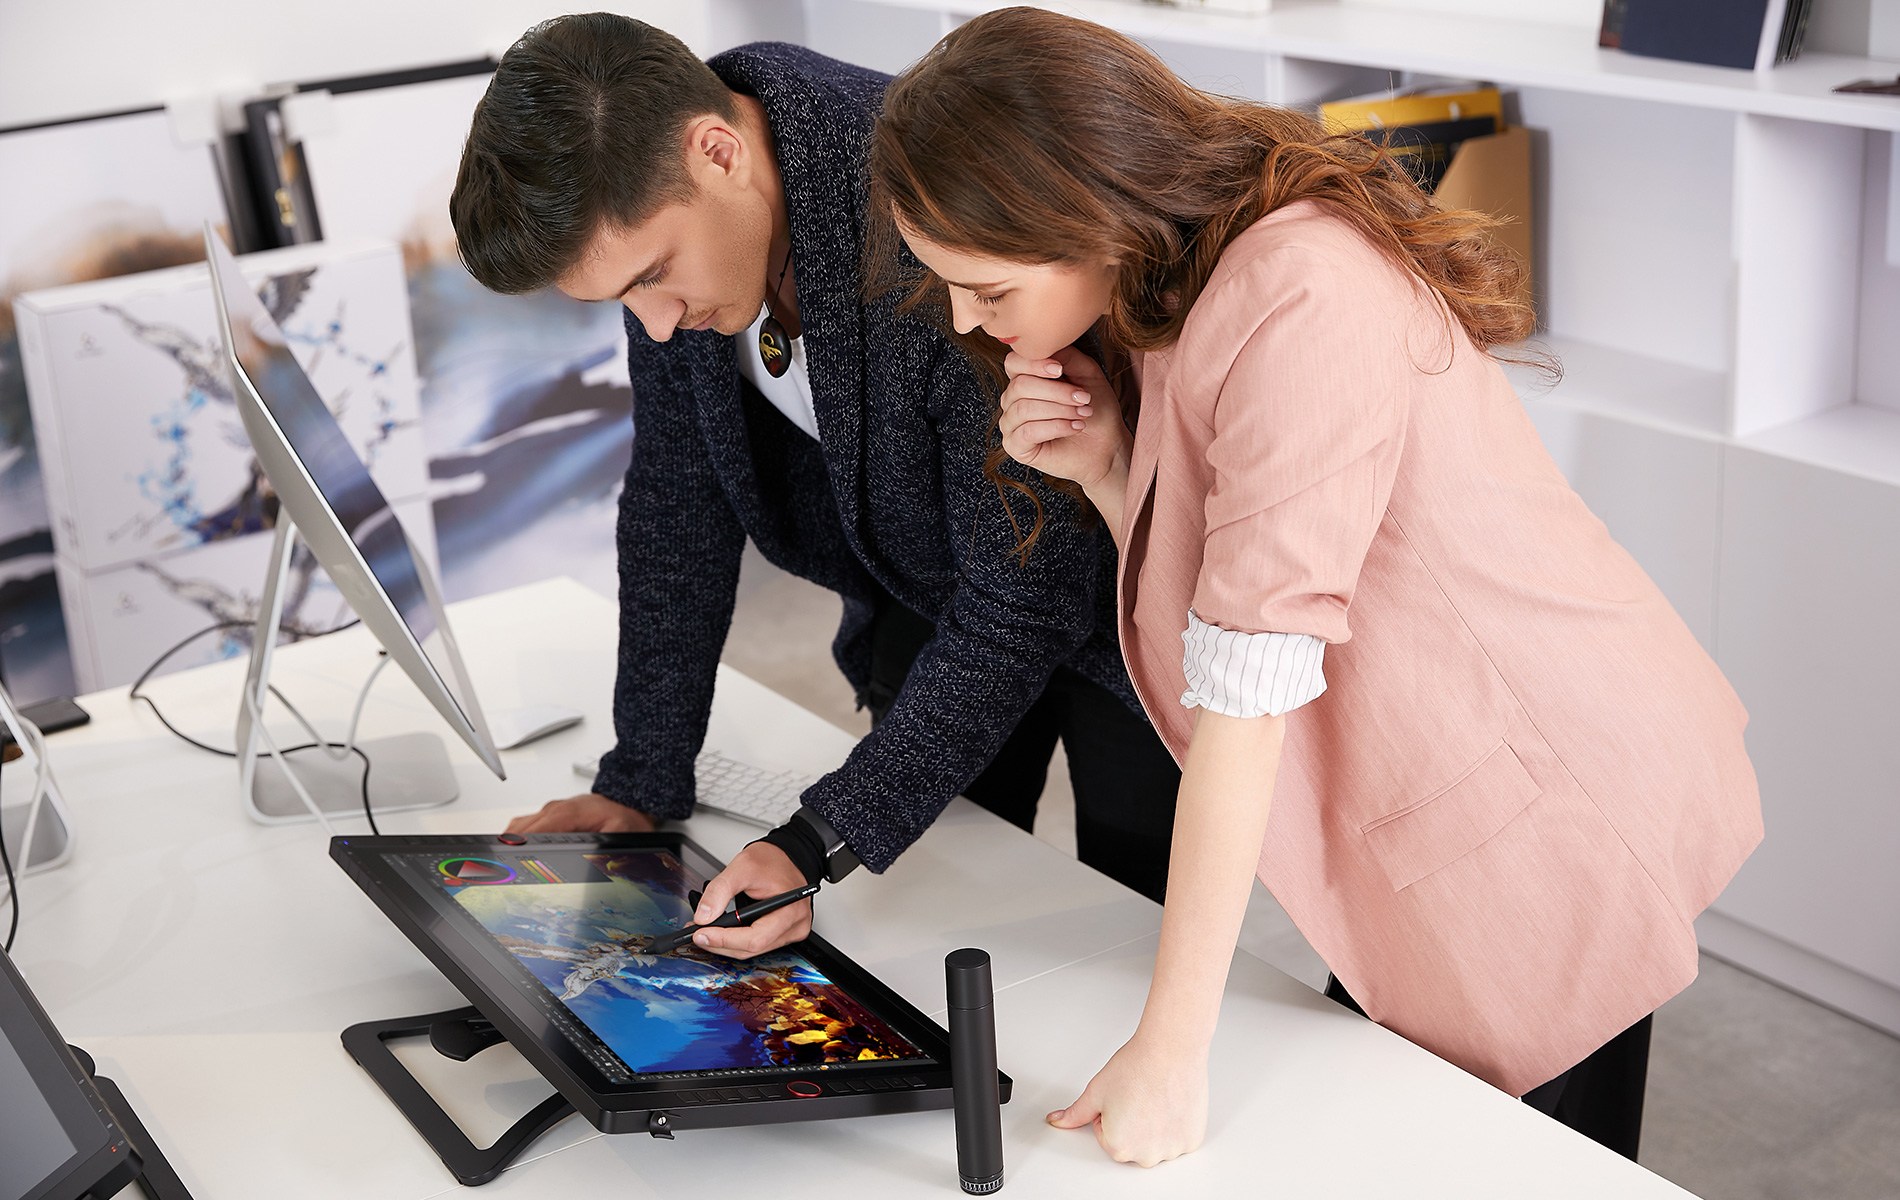 XP-Pen Artist 22R Pro Graphic Pen Display come with adjustable stand